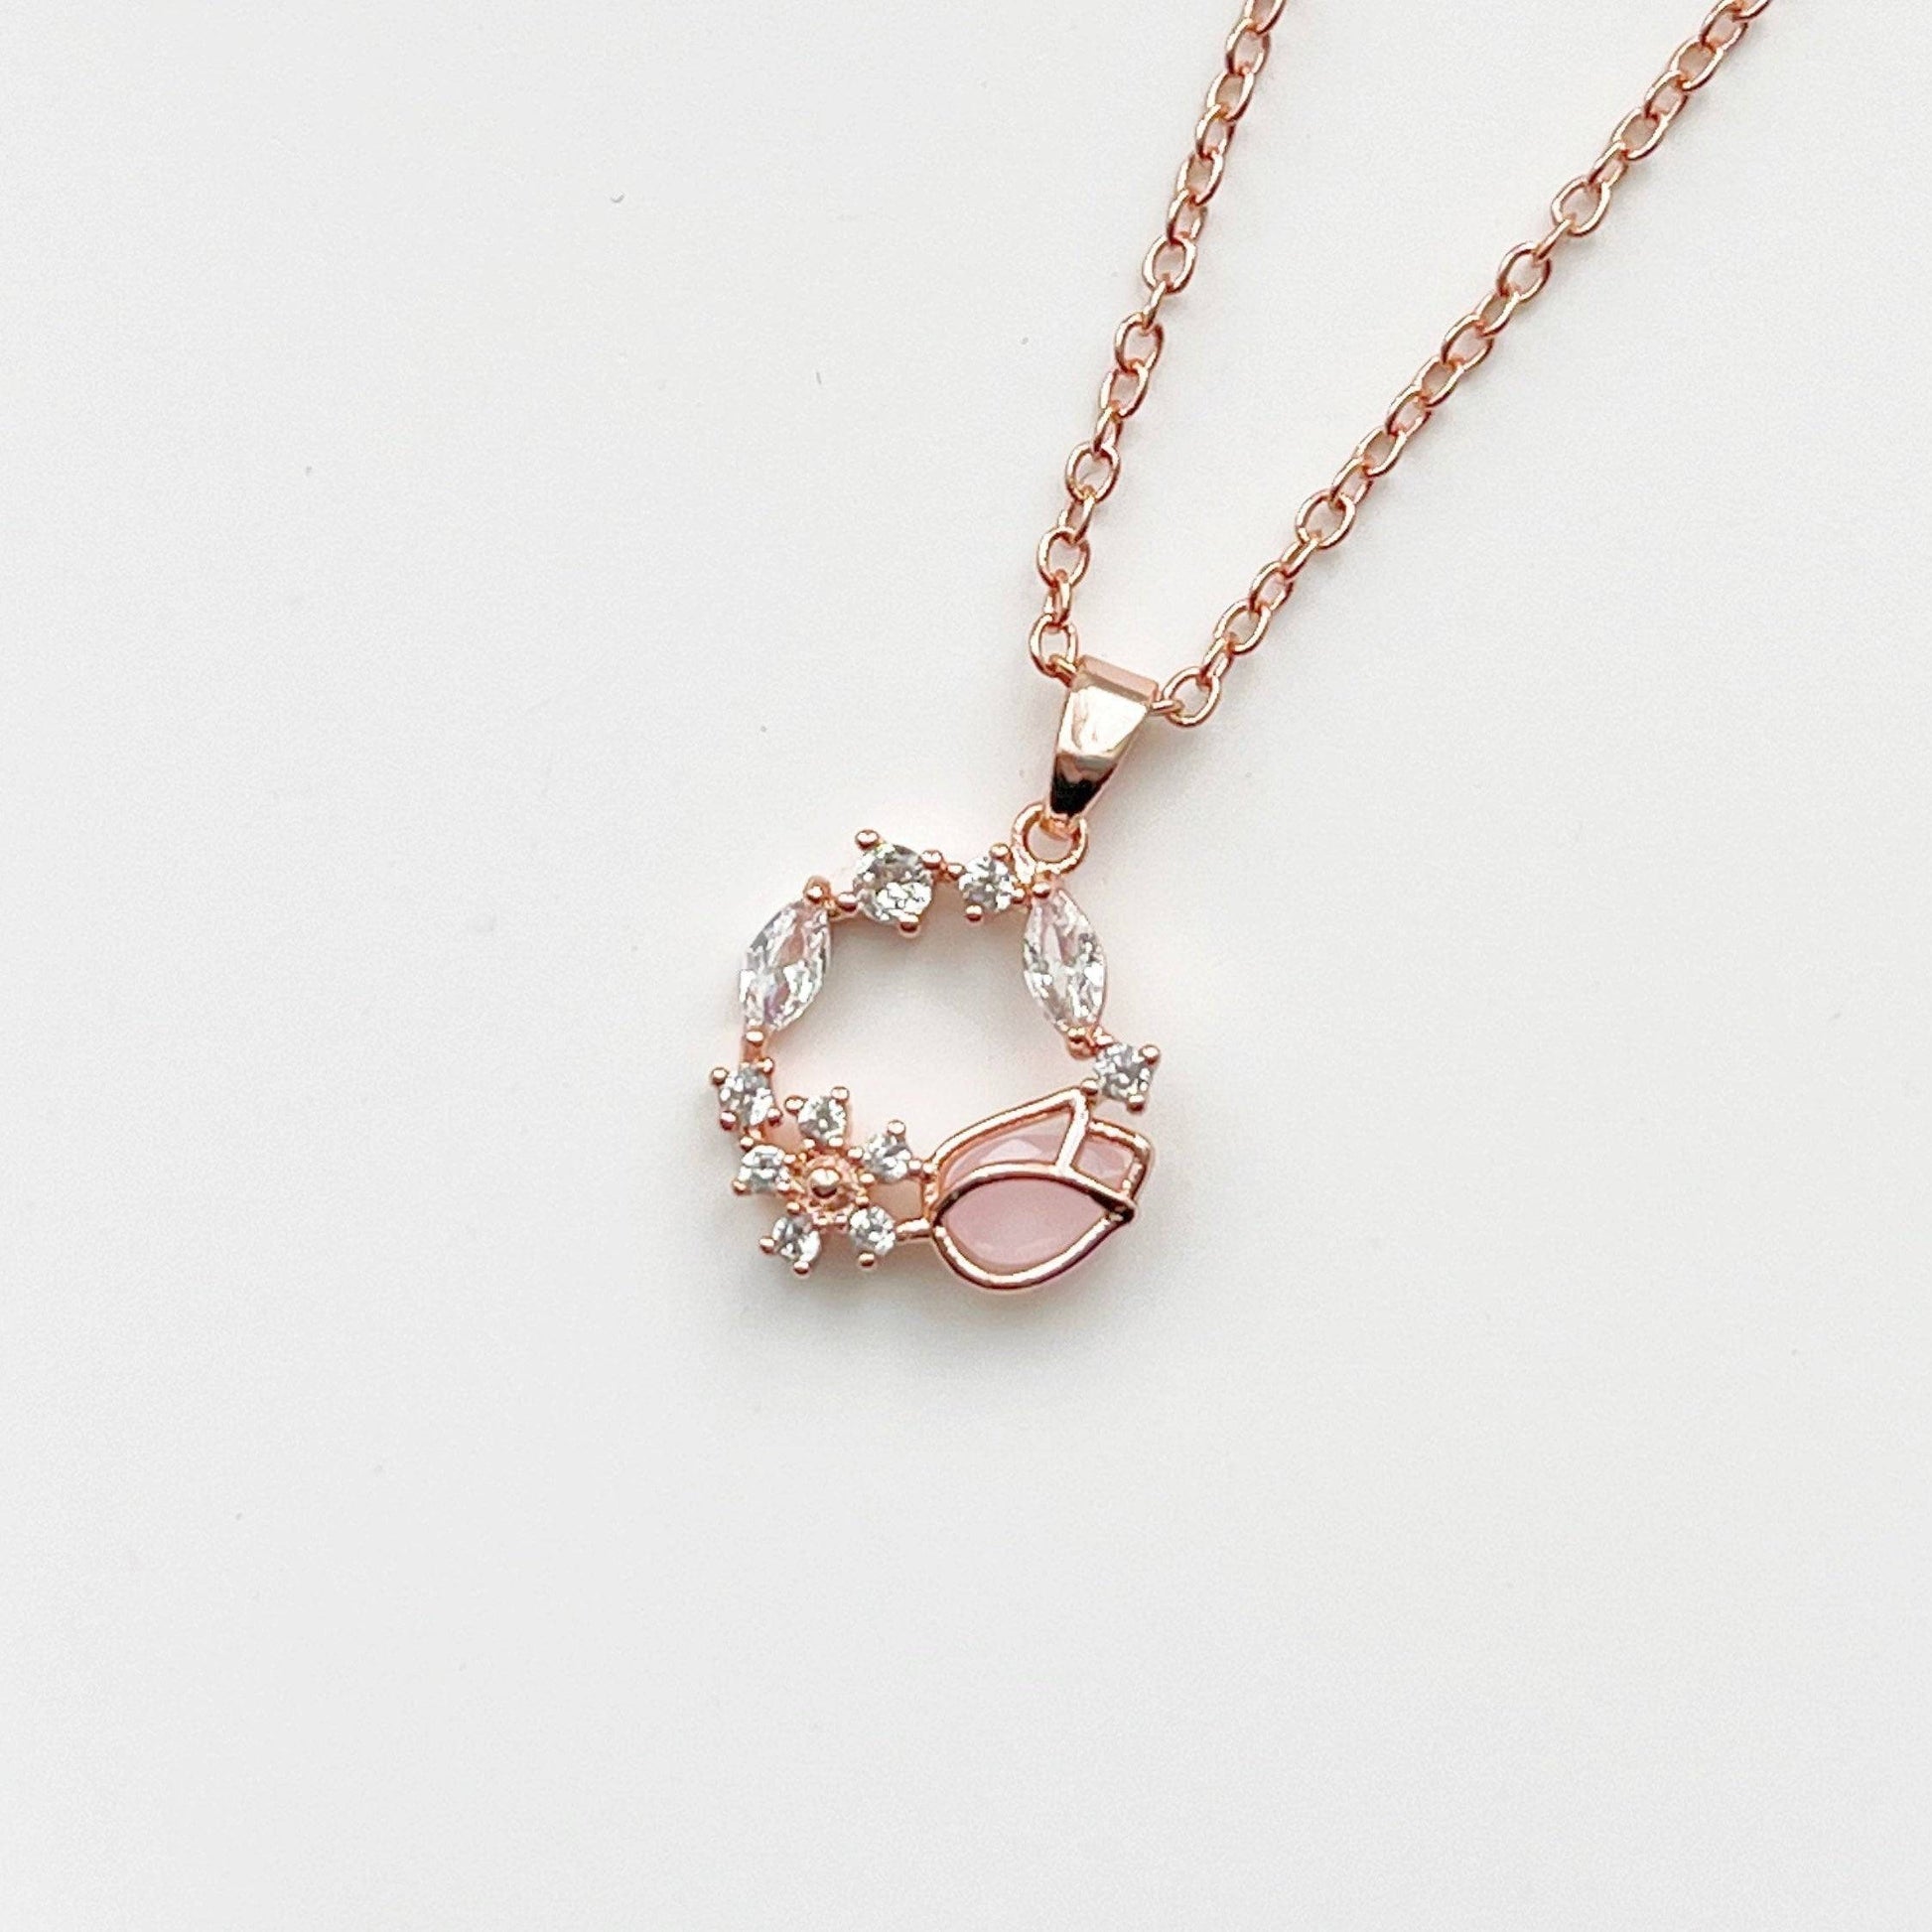 Pink Tulip Necklace - Flower Shape Crystal Rose Gold Necklace-Ninaouity